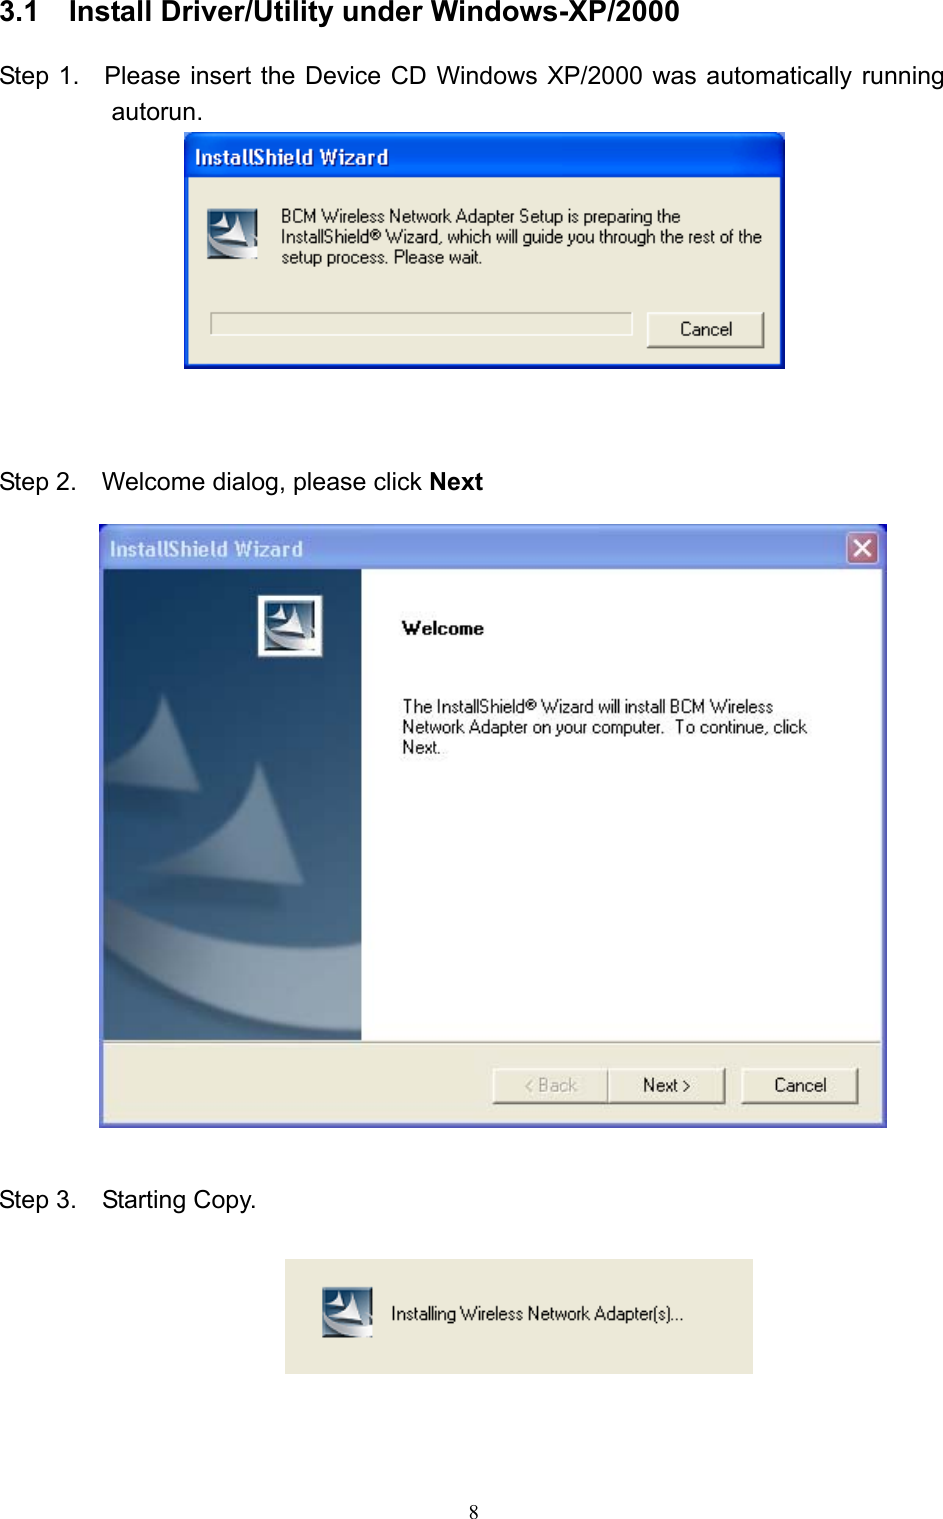   8 3.1    Install Driver/Utility under Windows-XP/2000  Step 1.    Please insert the Device CD Windows XP/2000 was automatically running autorun.     Step 2.    Welcome dialog, please click Next     Step 3.  Starting Copy.     